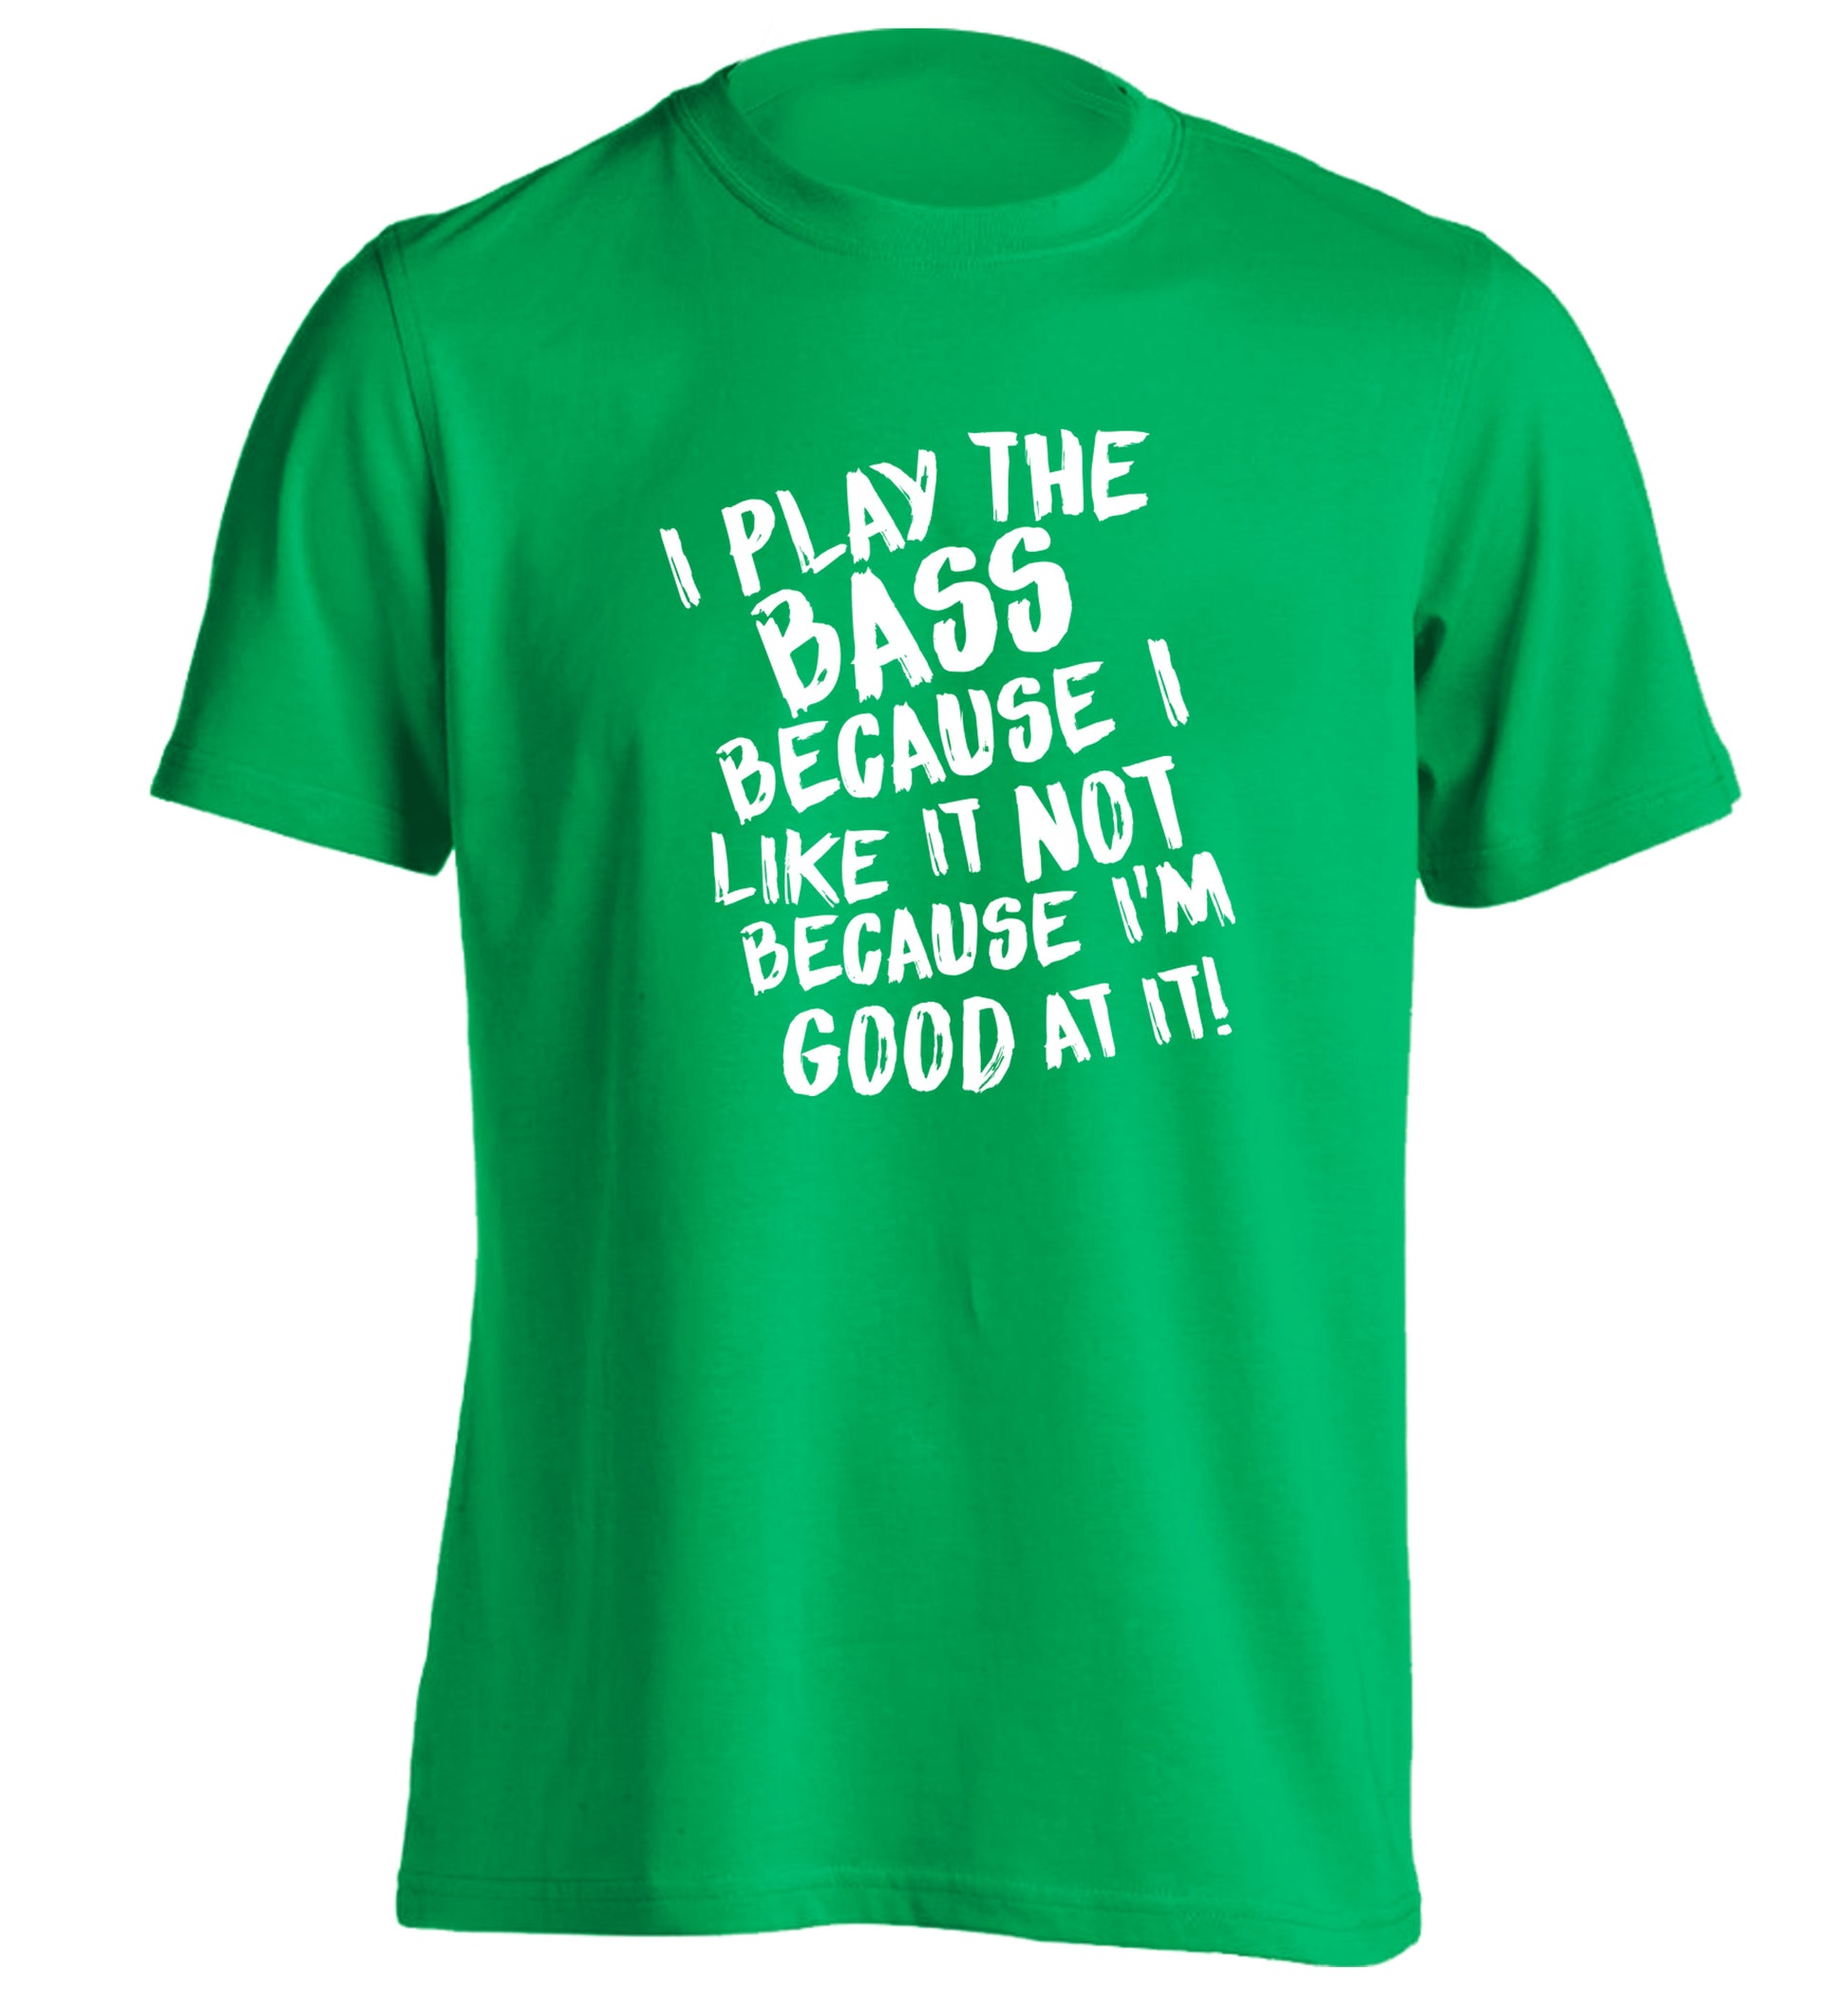 I play the bass because I like it not because I'm good at it adults unisex green Tshirt 2XL